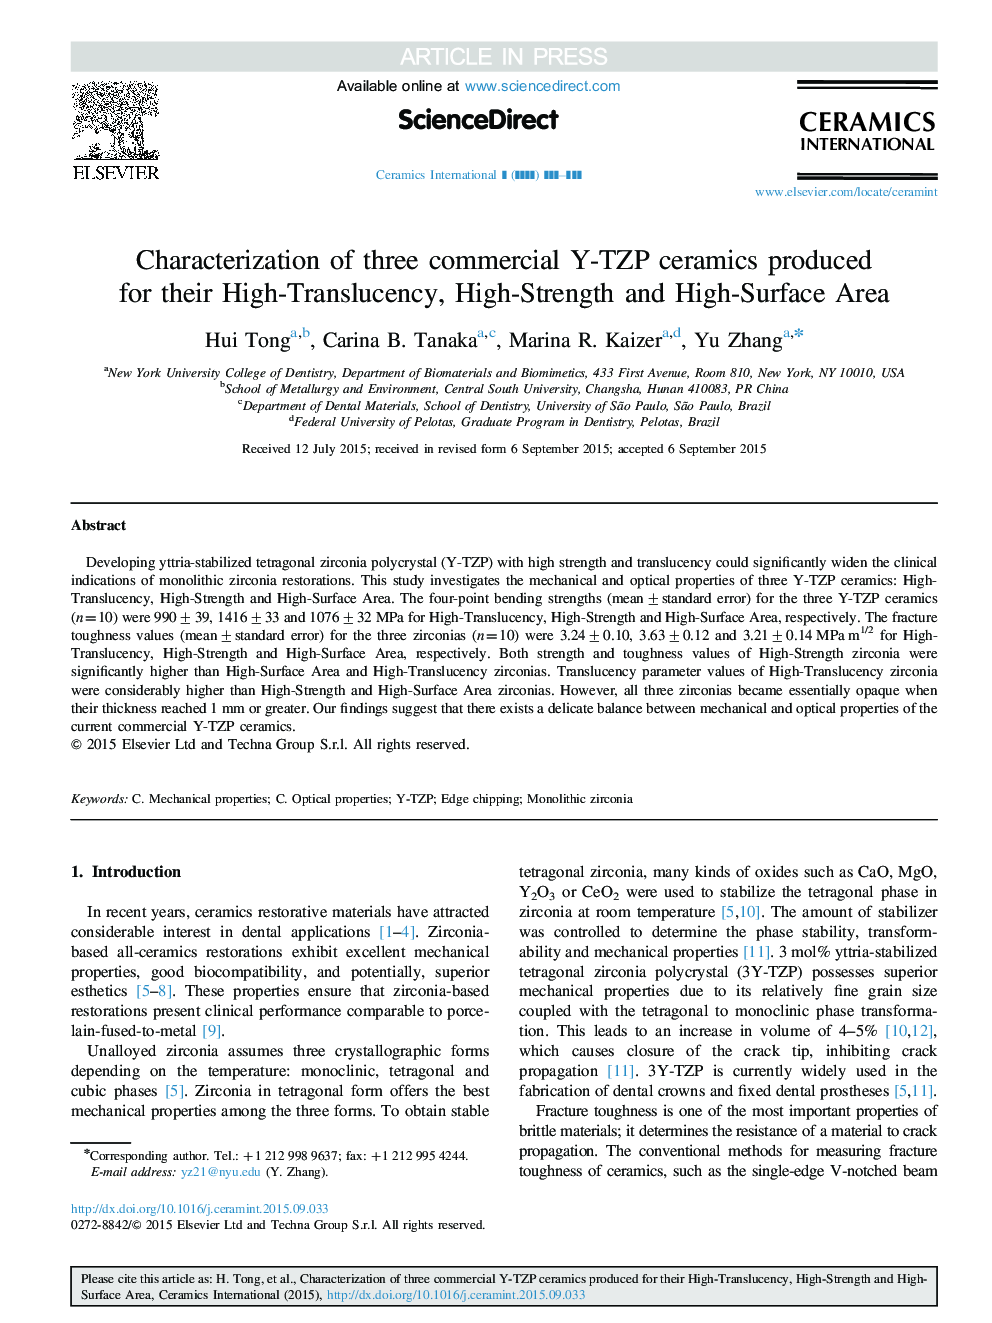 Characterization of three commercial Y-TZP ceramics produced for their High-Translucency, High-Strength and High-Surface Area